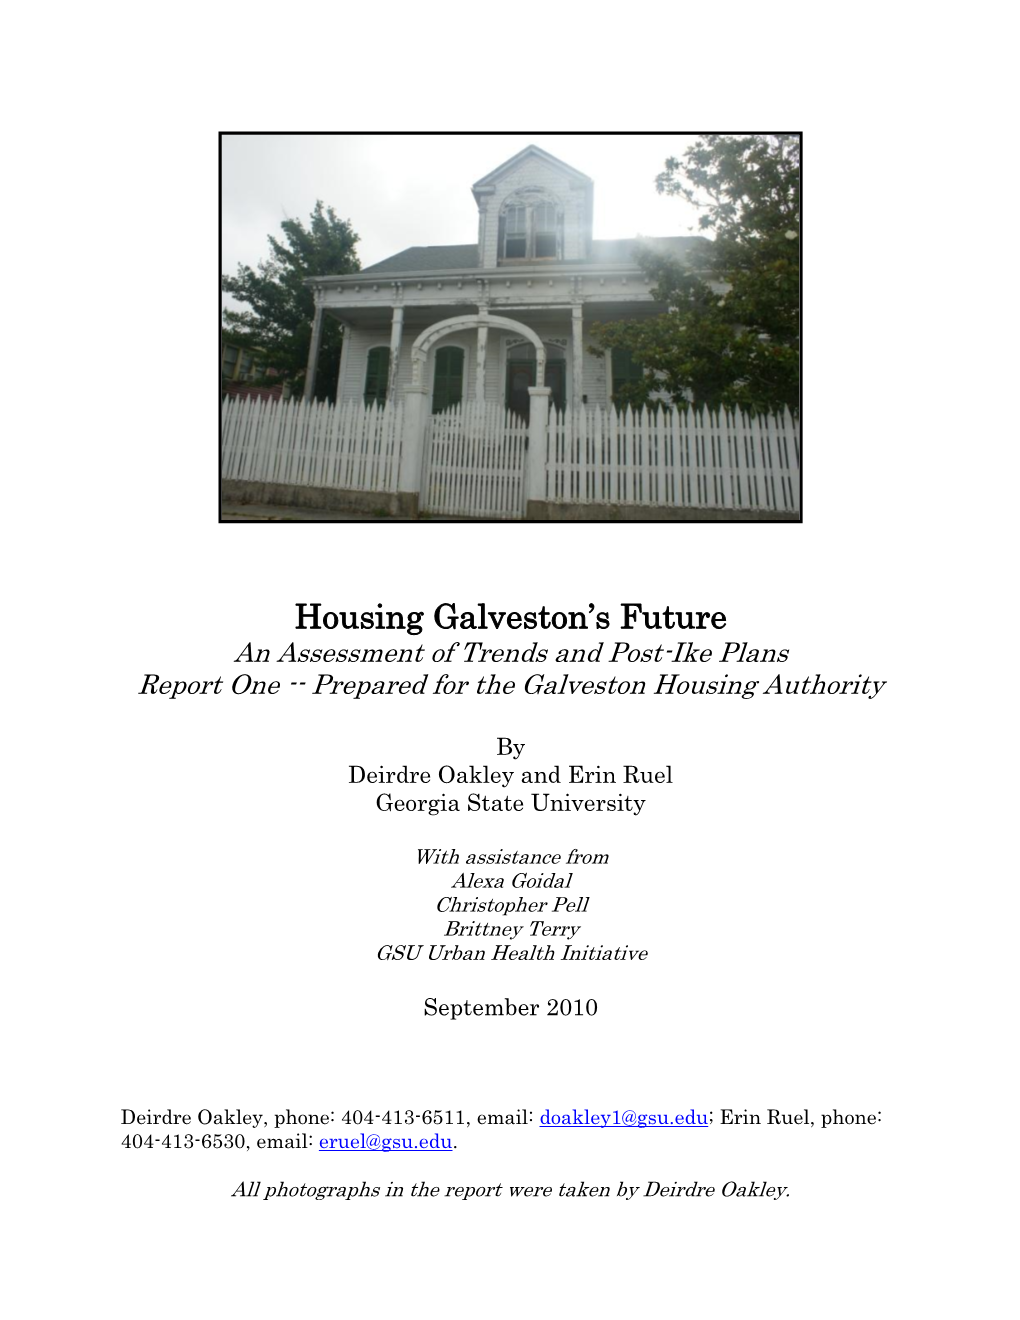 An Assessment of Trends and Post-Ike Plans Report One -- Prepared for the Galveston Housing Authority